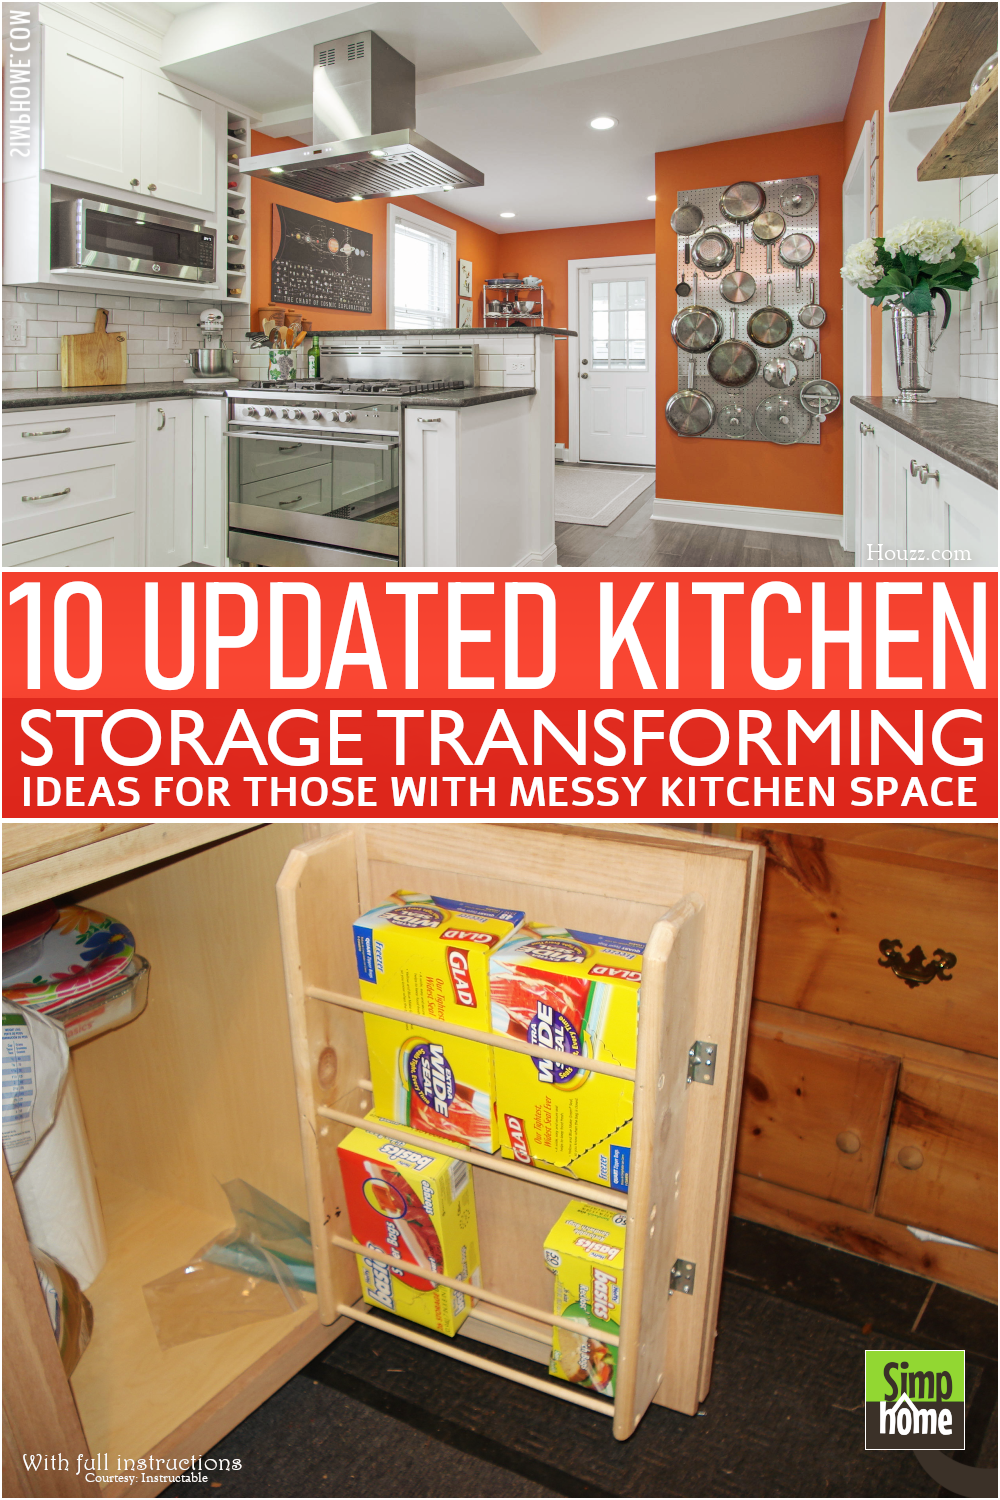 10 Updated Kitchen Storage Poster by Simphome